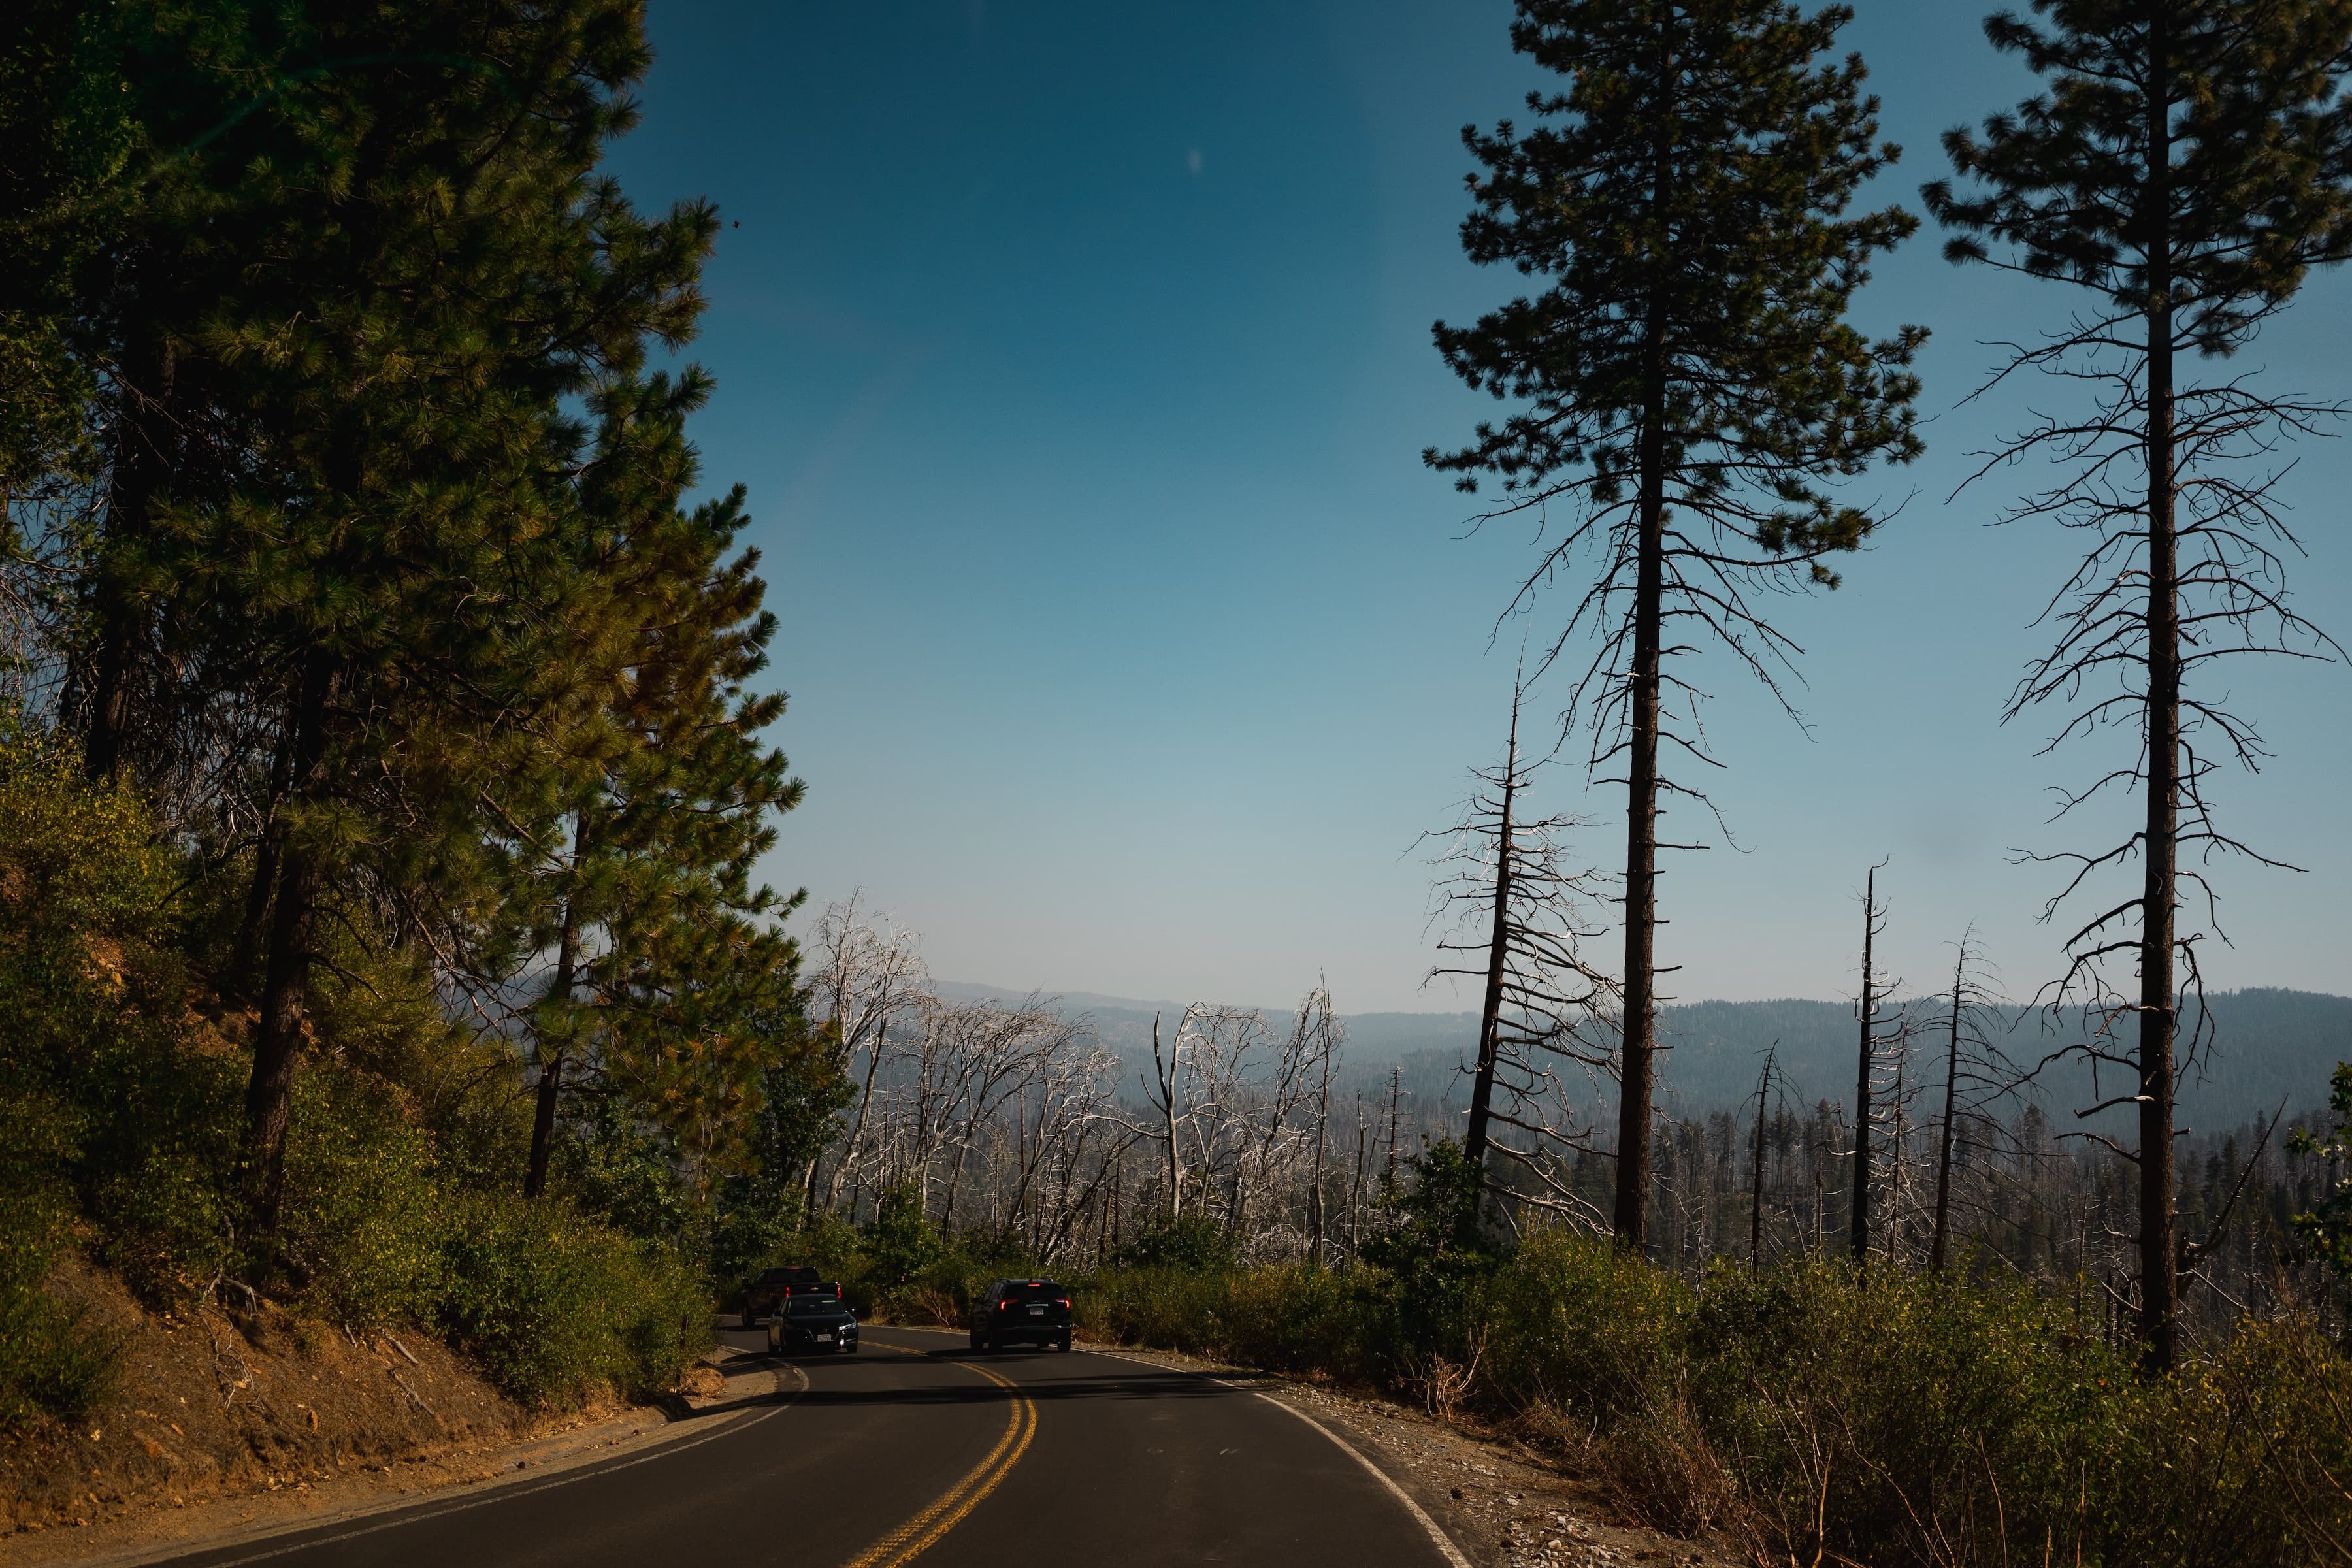 A winding road flanked by green pine trees on one side and charred tree trunks on the other, leading through a forest affected by wildfire under a clear blue sky.